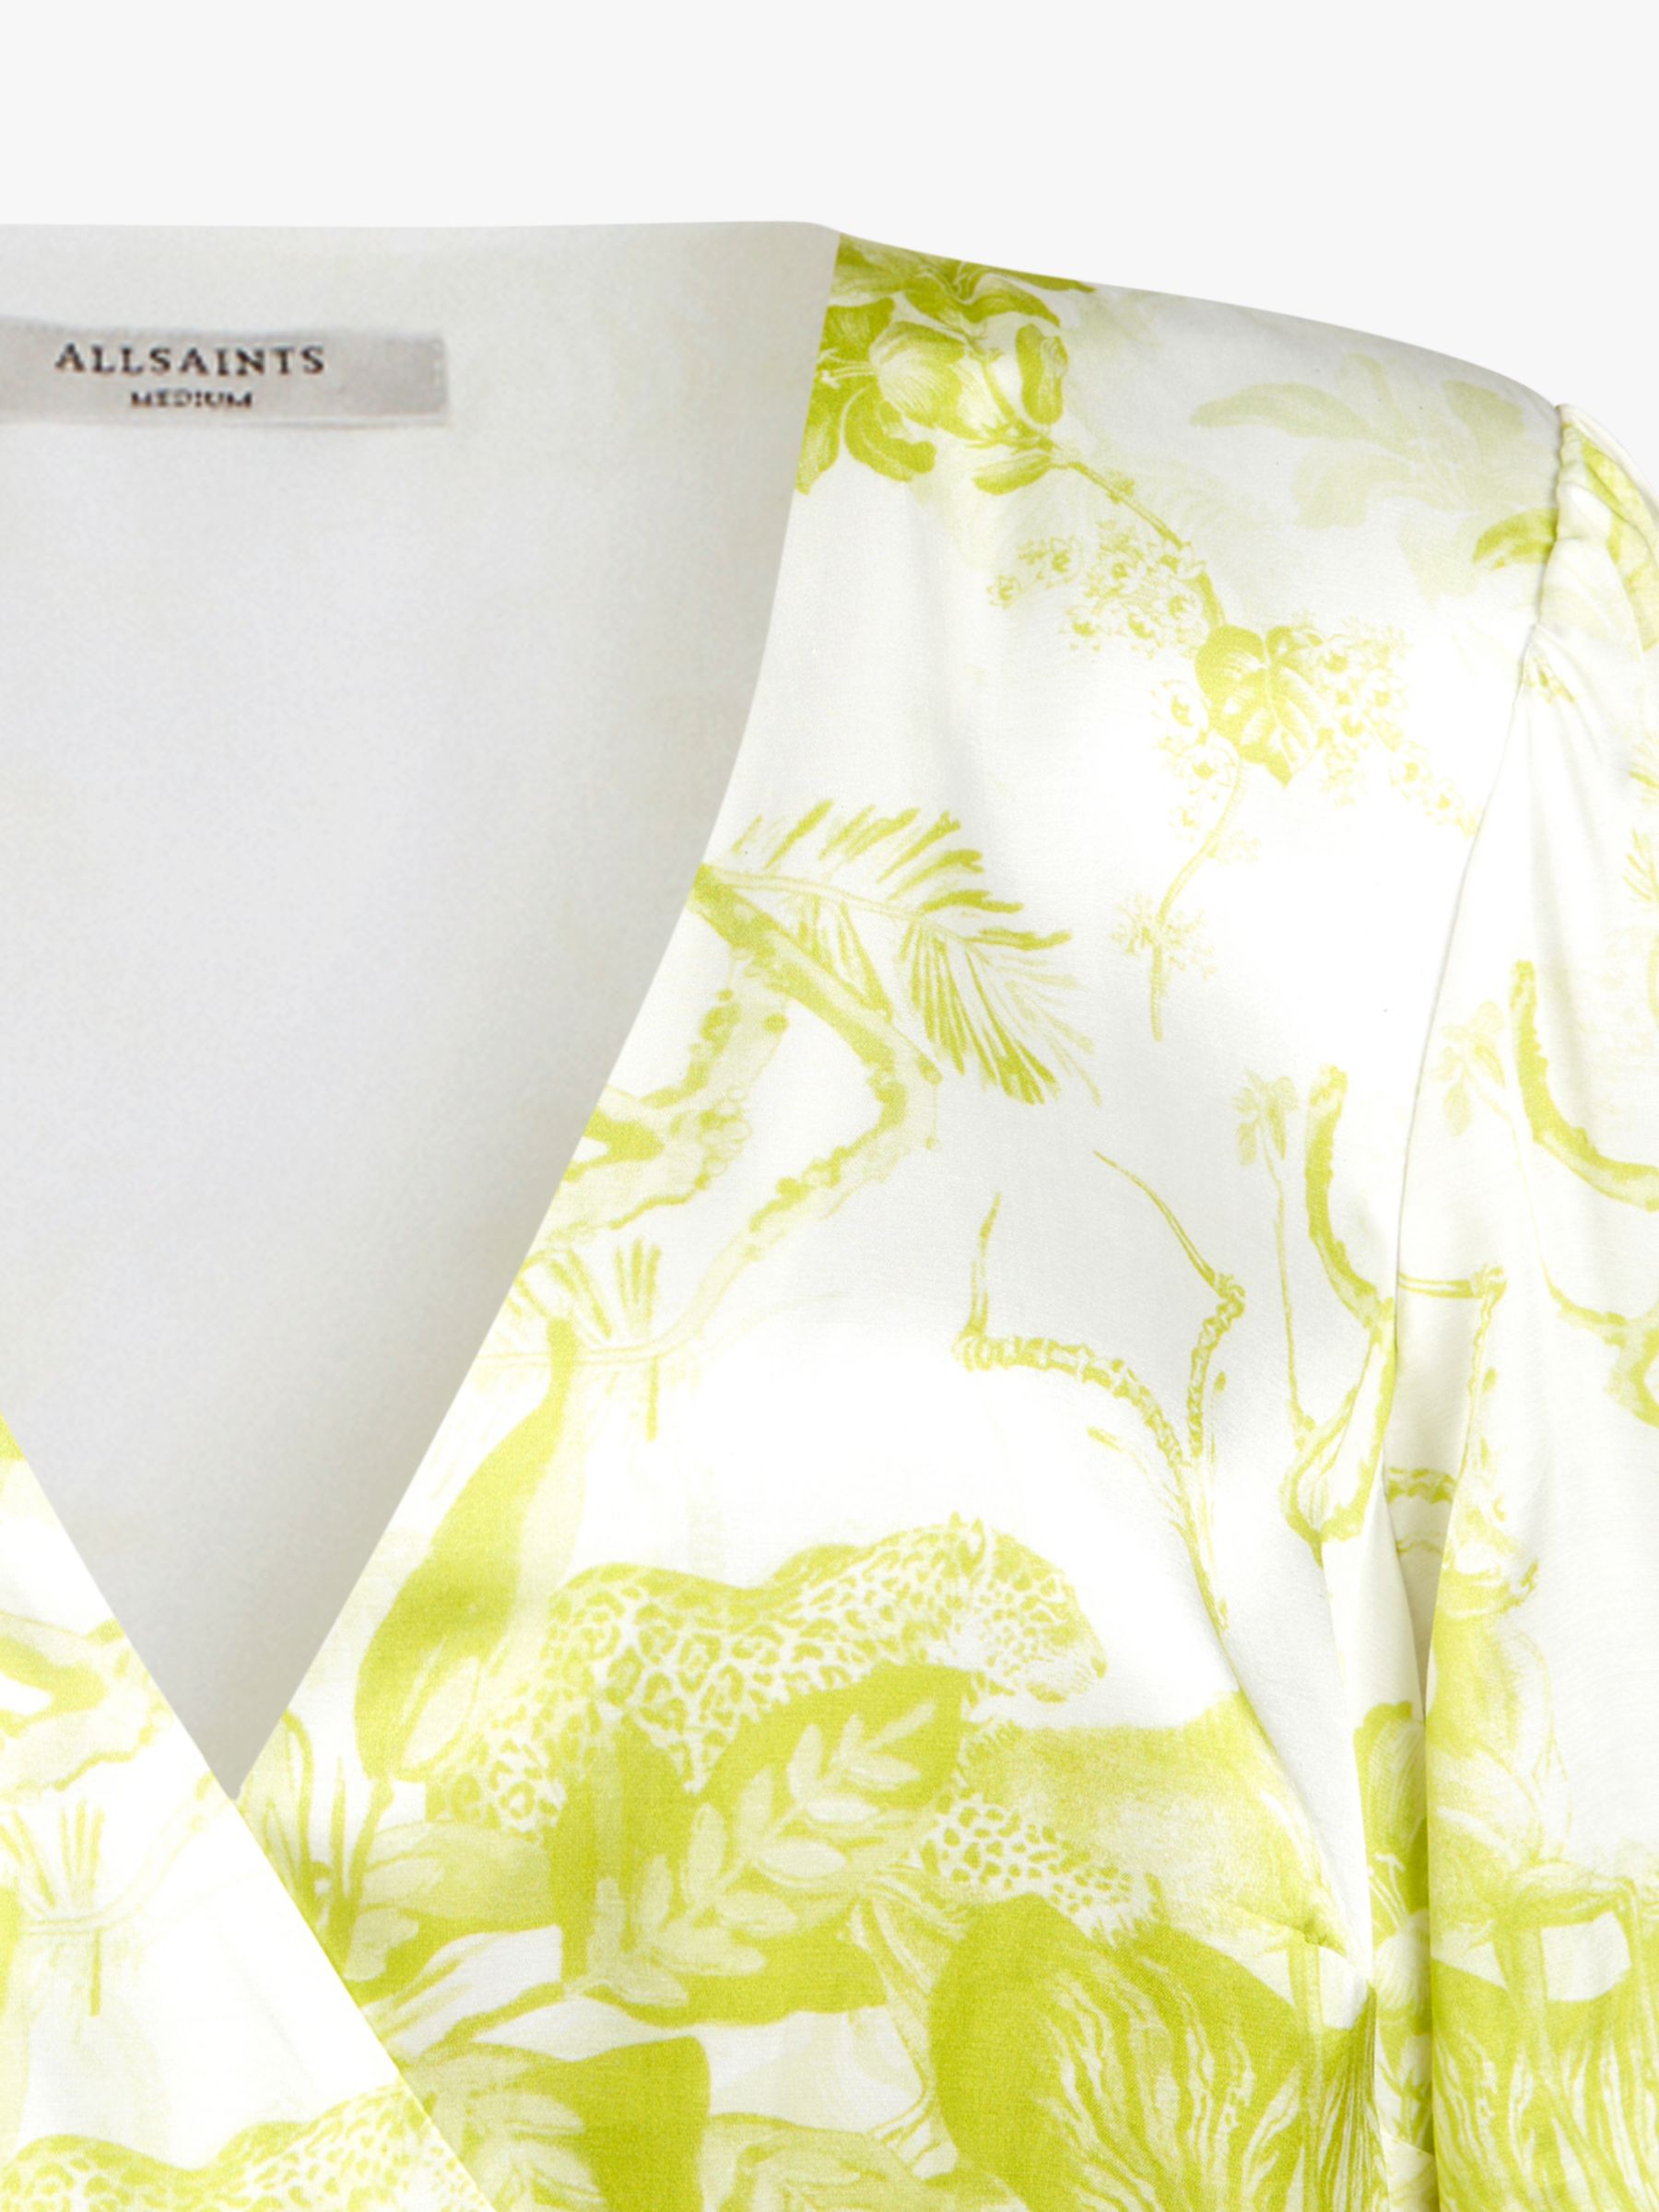 AllSaints Tage Floral Dress, Chartreuse Yellow at John Lewis & Partners